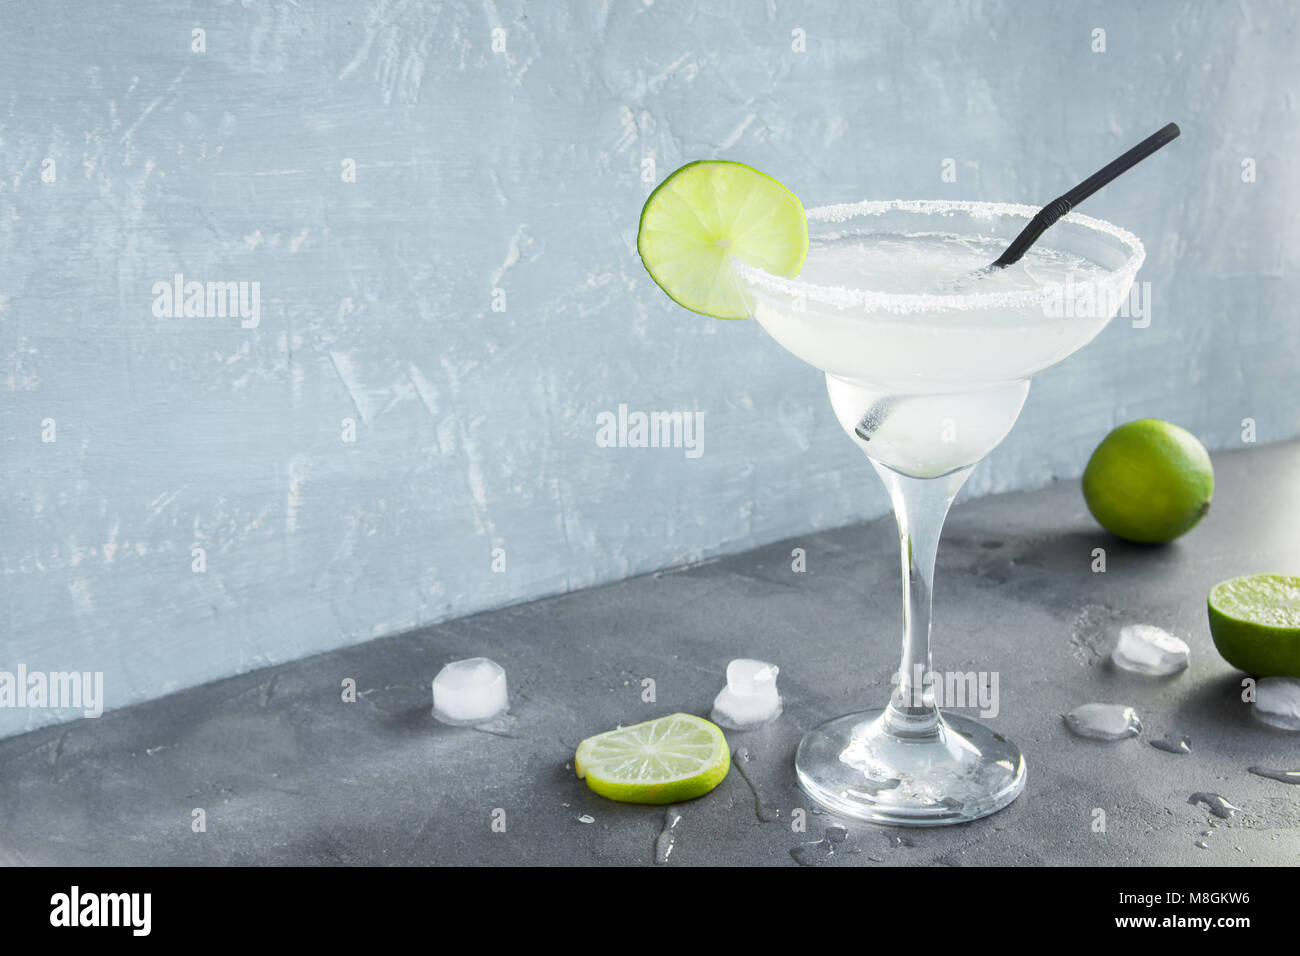 Margarita Сocktail with lime and ice on grey concrete background, copy space. Classic Margarita or Daiquiry Cocktail. Stock Photo